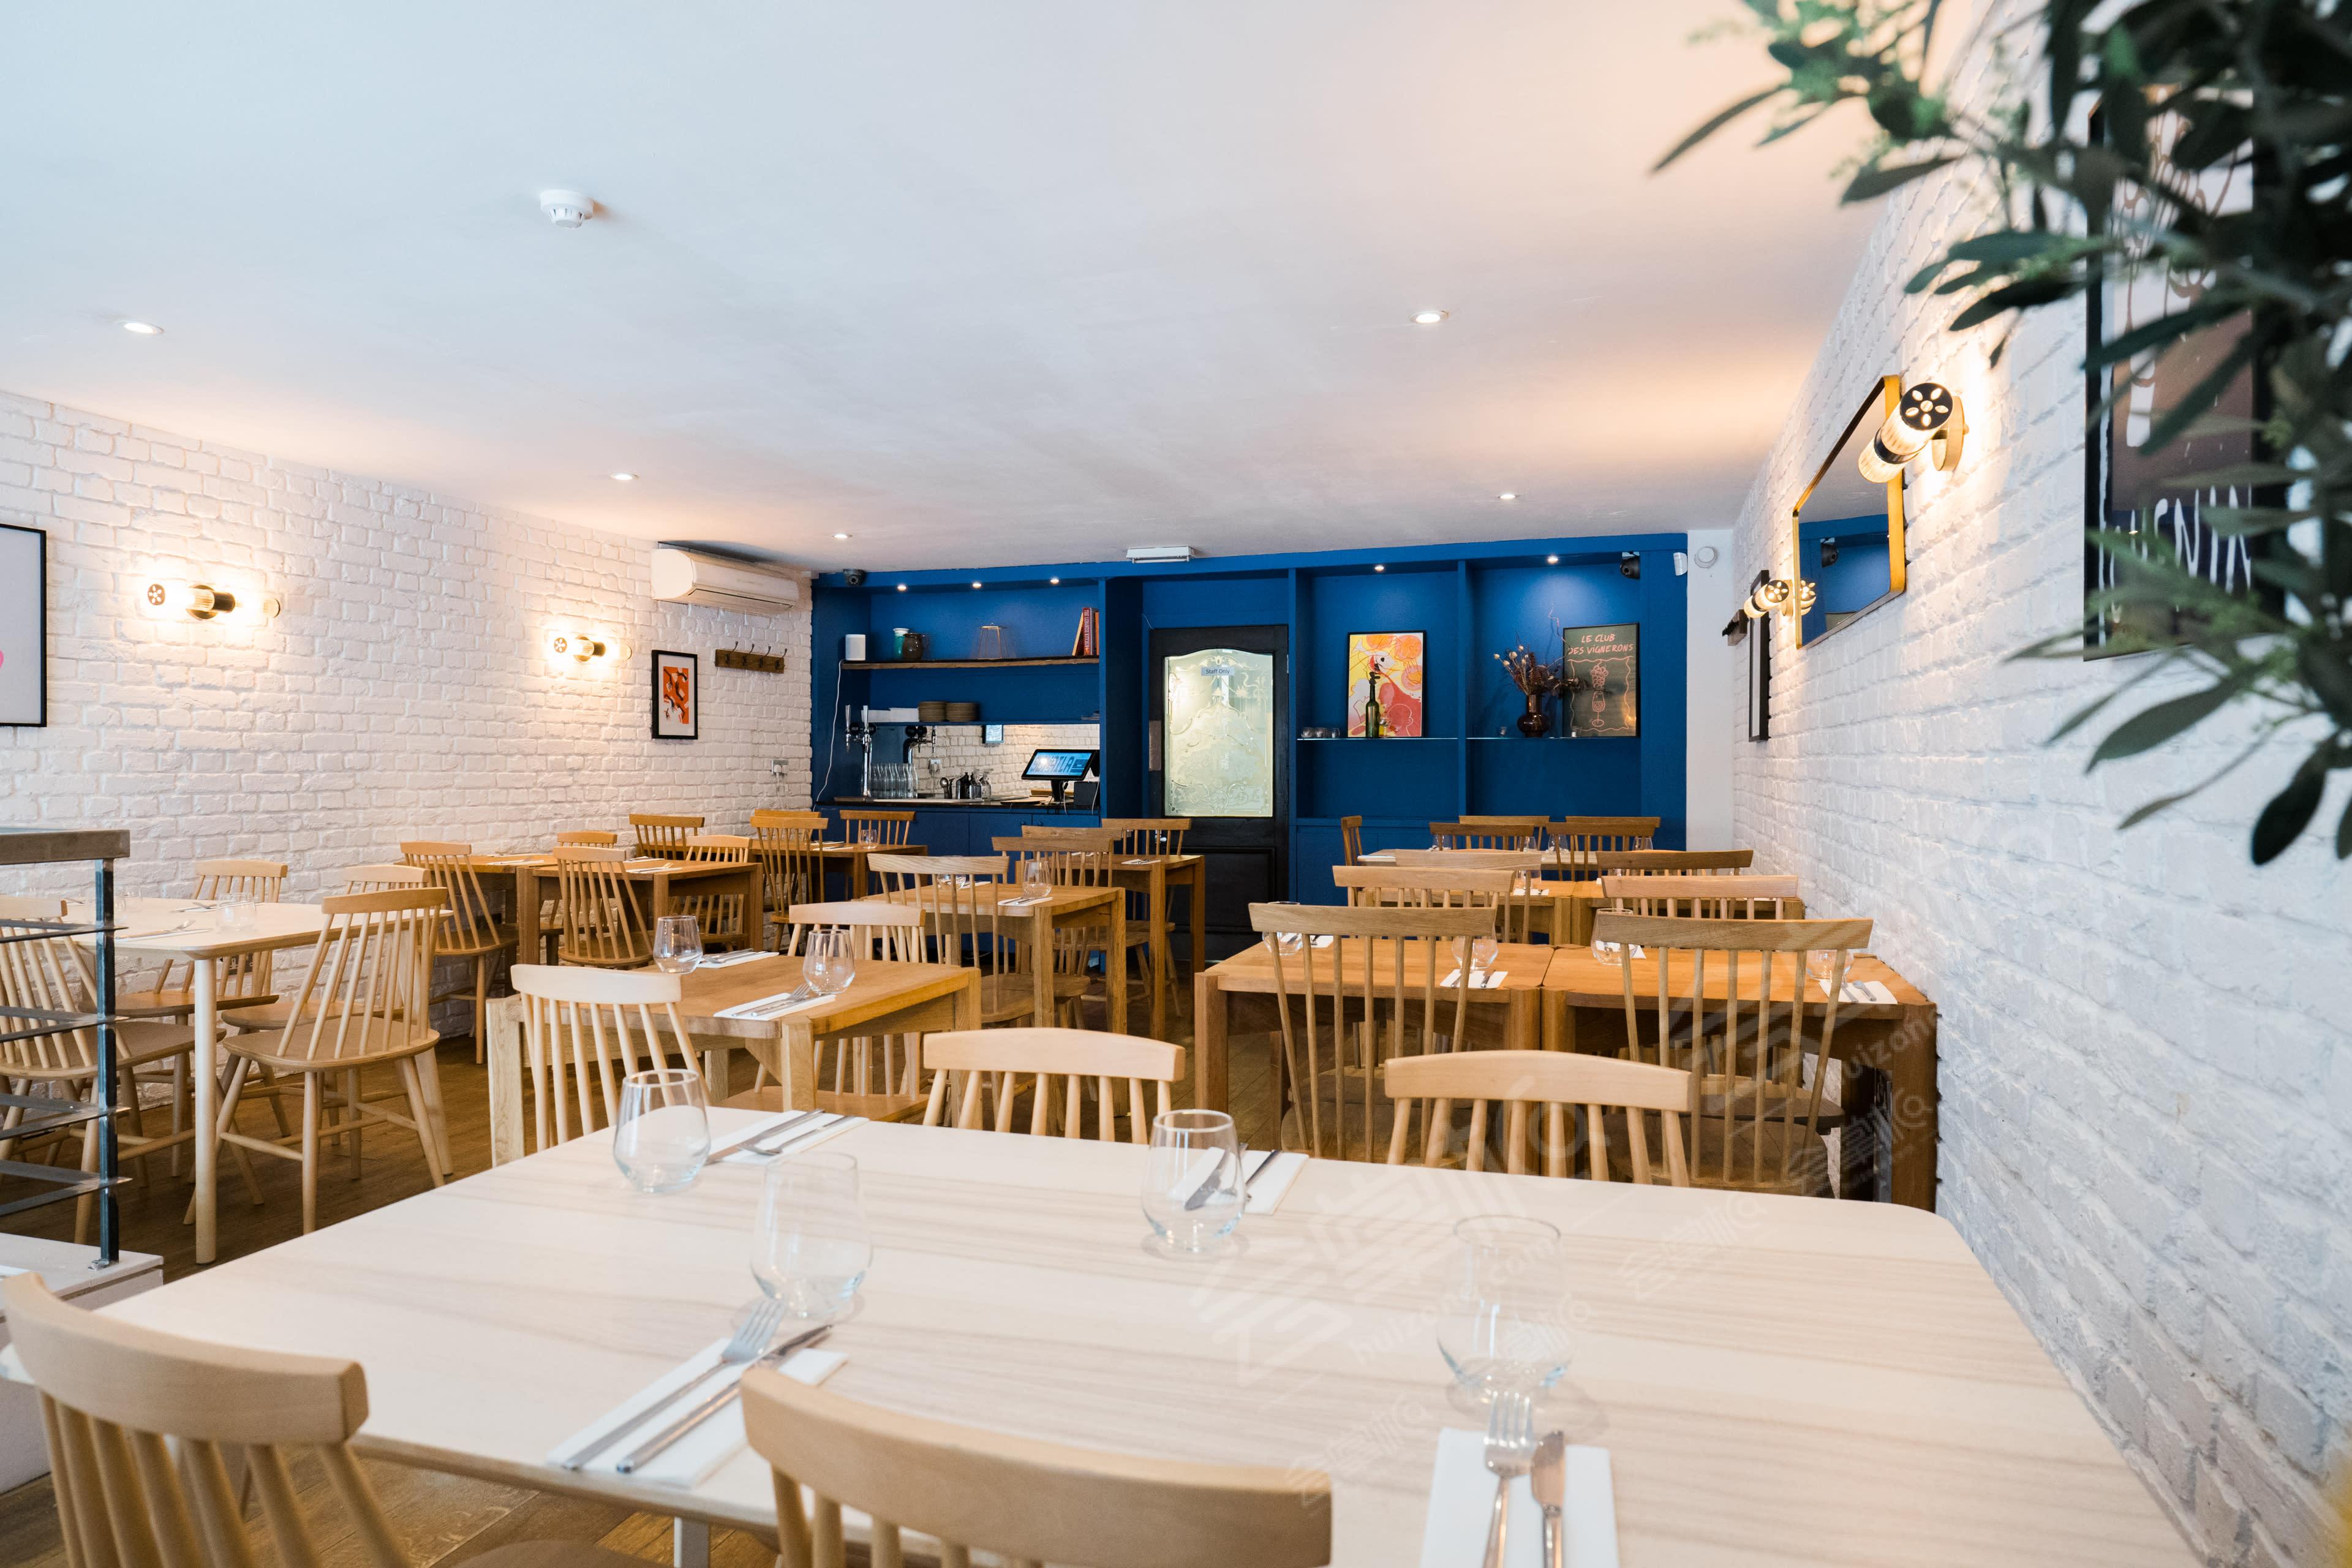 Bright Event Space in Shoreditch High Street - The Restaurant